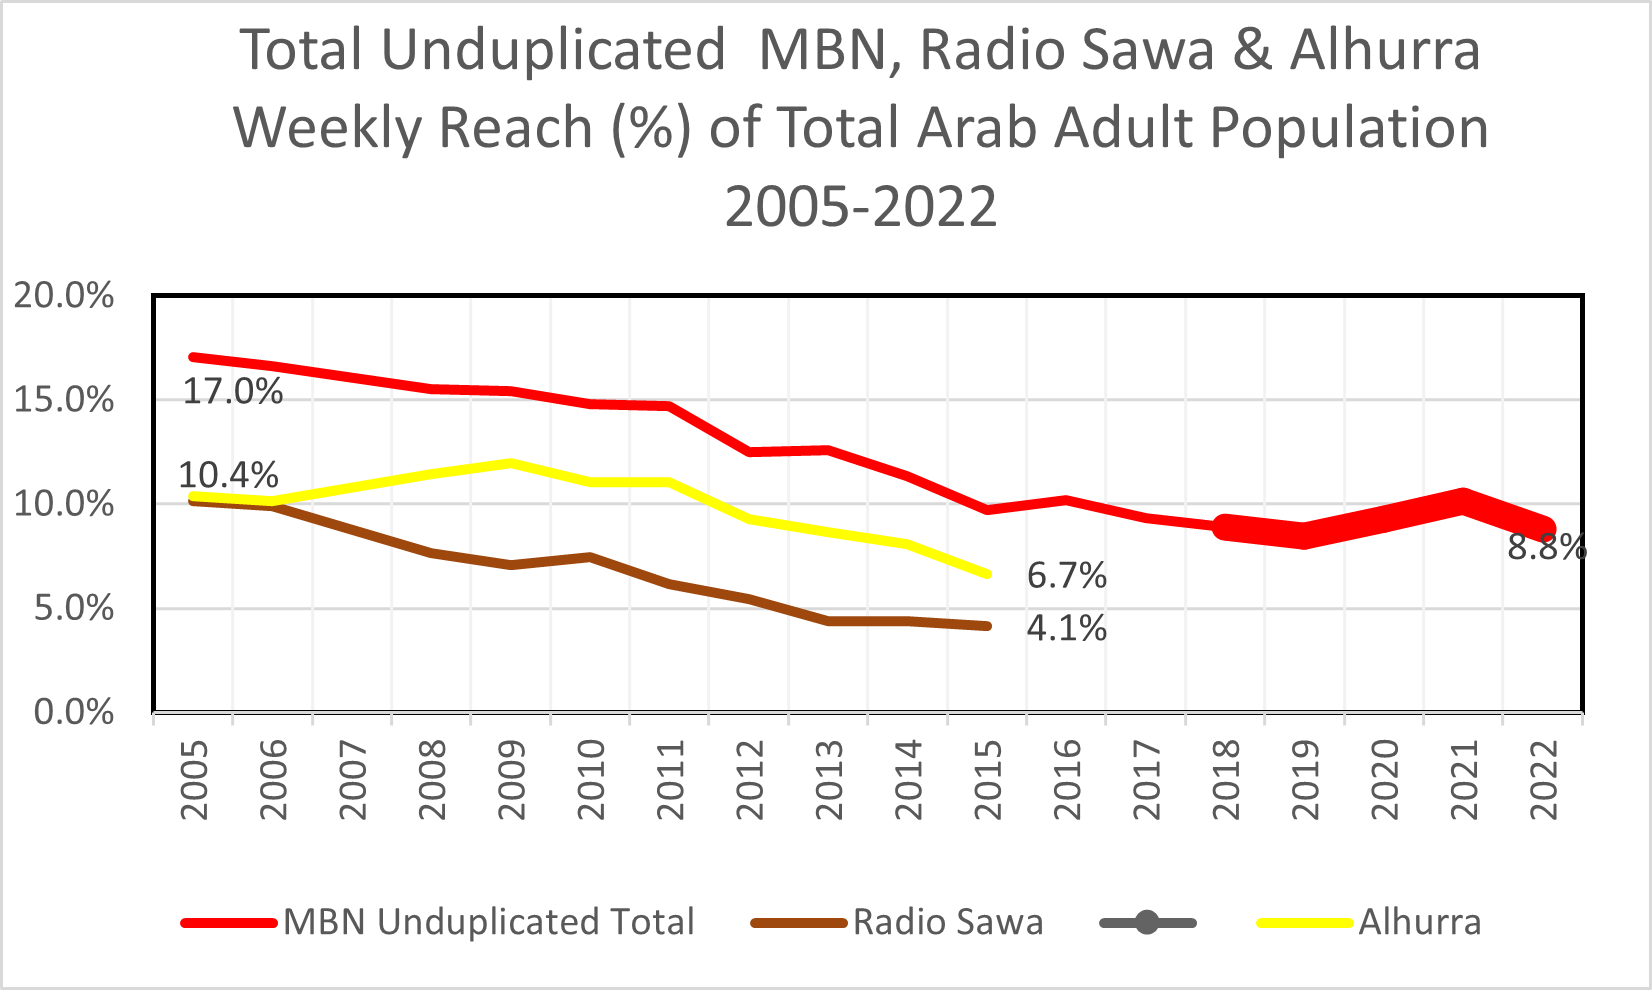 Chart showing total unduplicated MBN, Radio Sawa & Alhurra weekly reach of total Arab adult population, 2005-2022